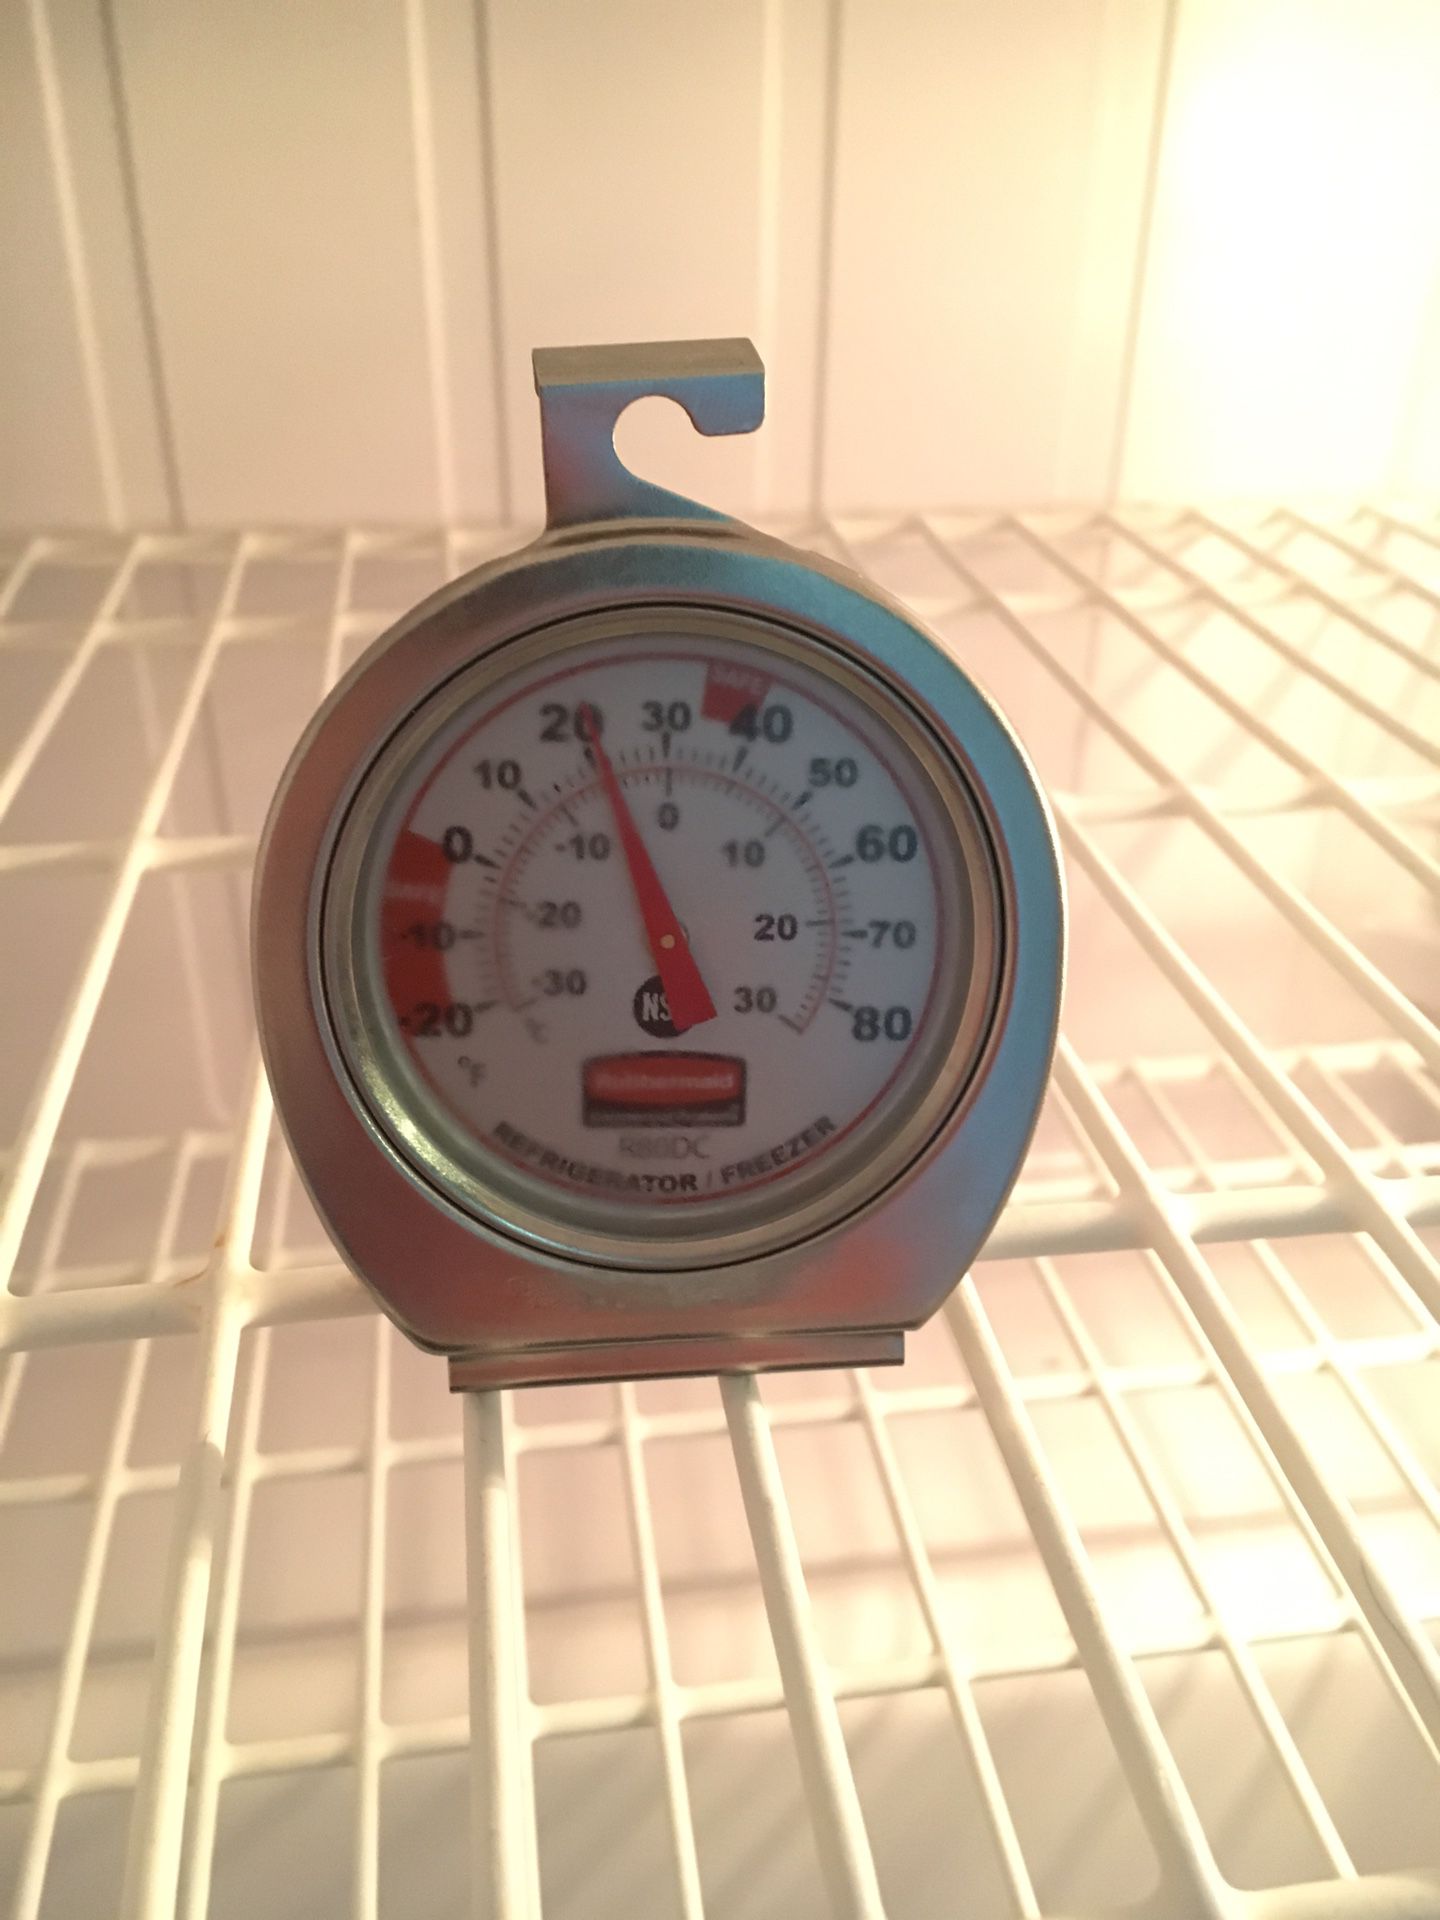 Rubbermaid Commercial Stainless Steel Oven Monitoring Thermometer